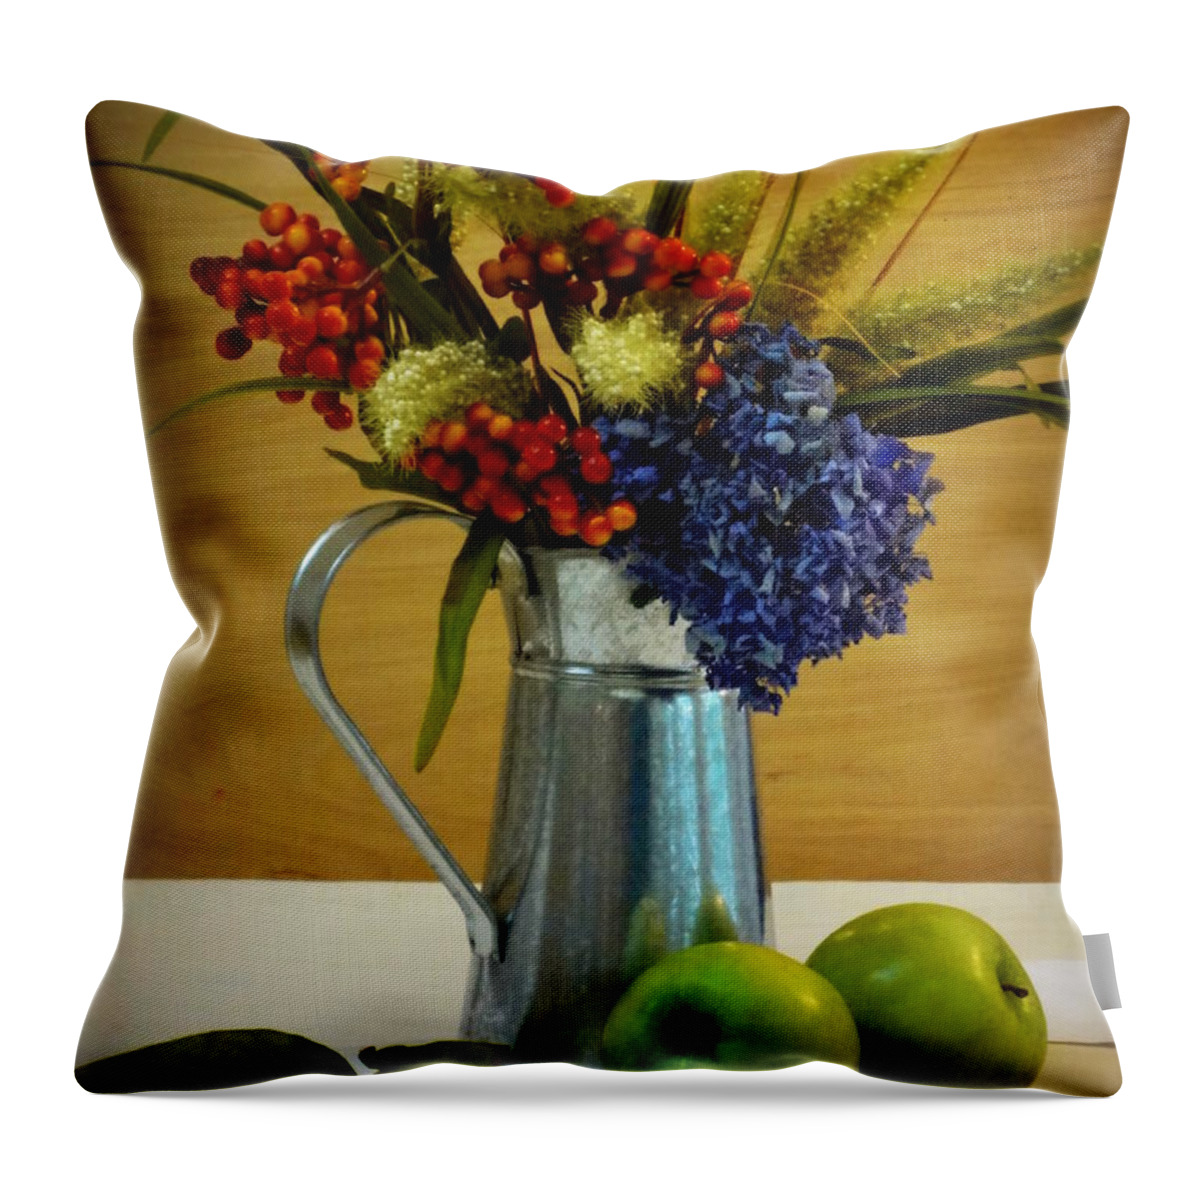 Bouquet Throw Pillow featuring the photograph Tin Bouquet and Green Apples by Deborah Crew-Johnson